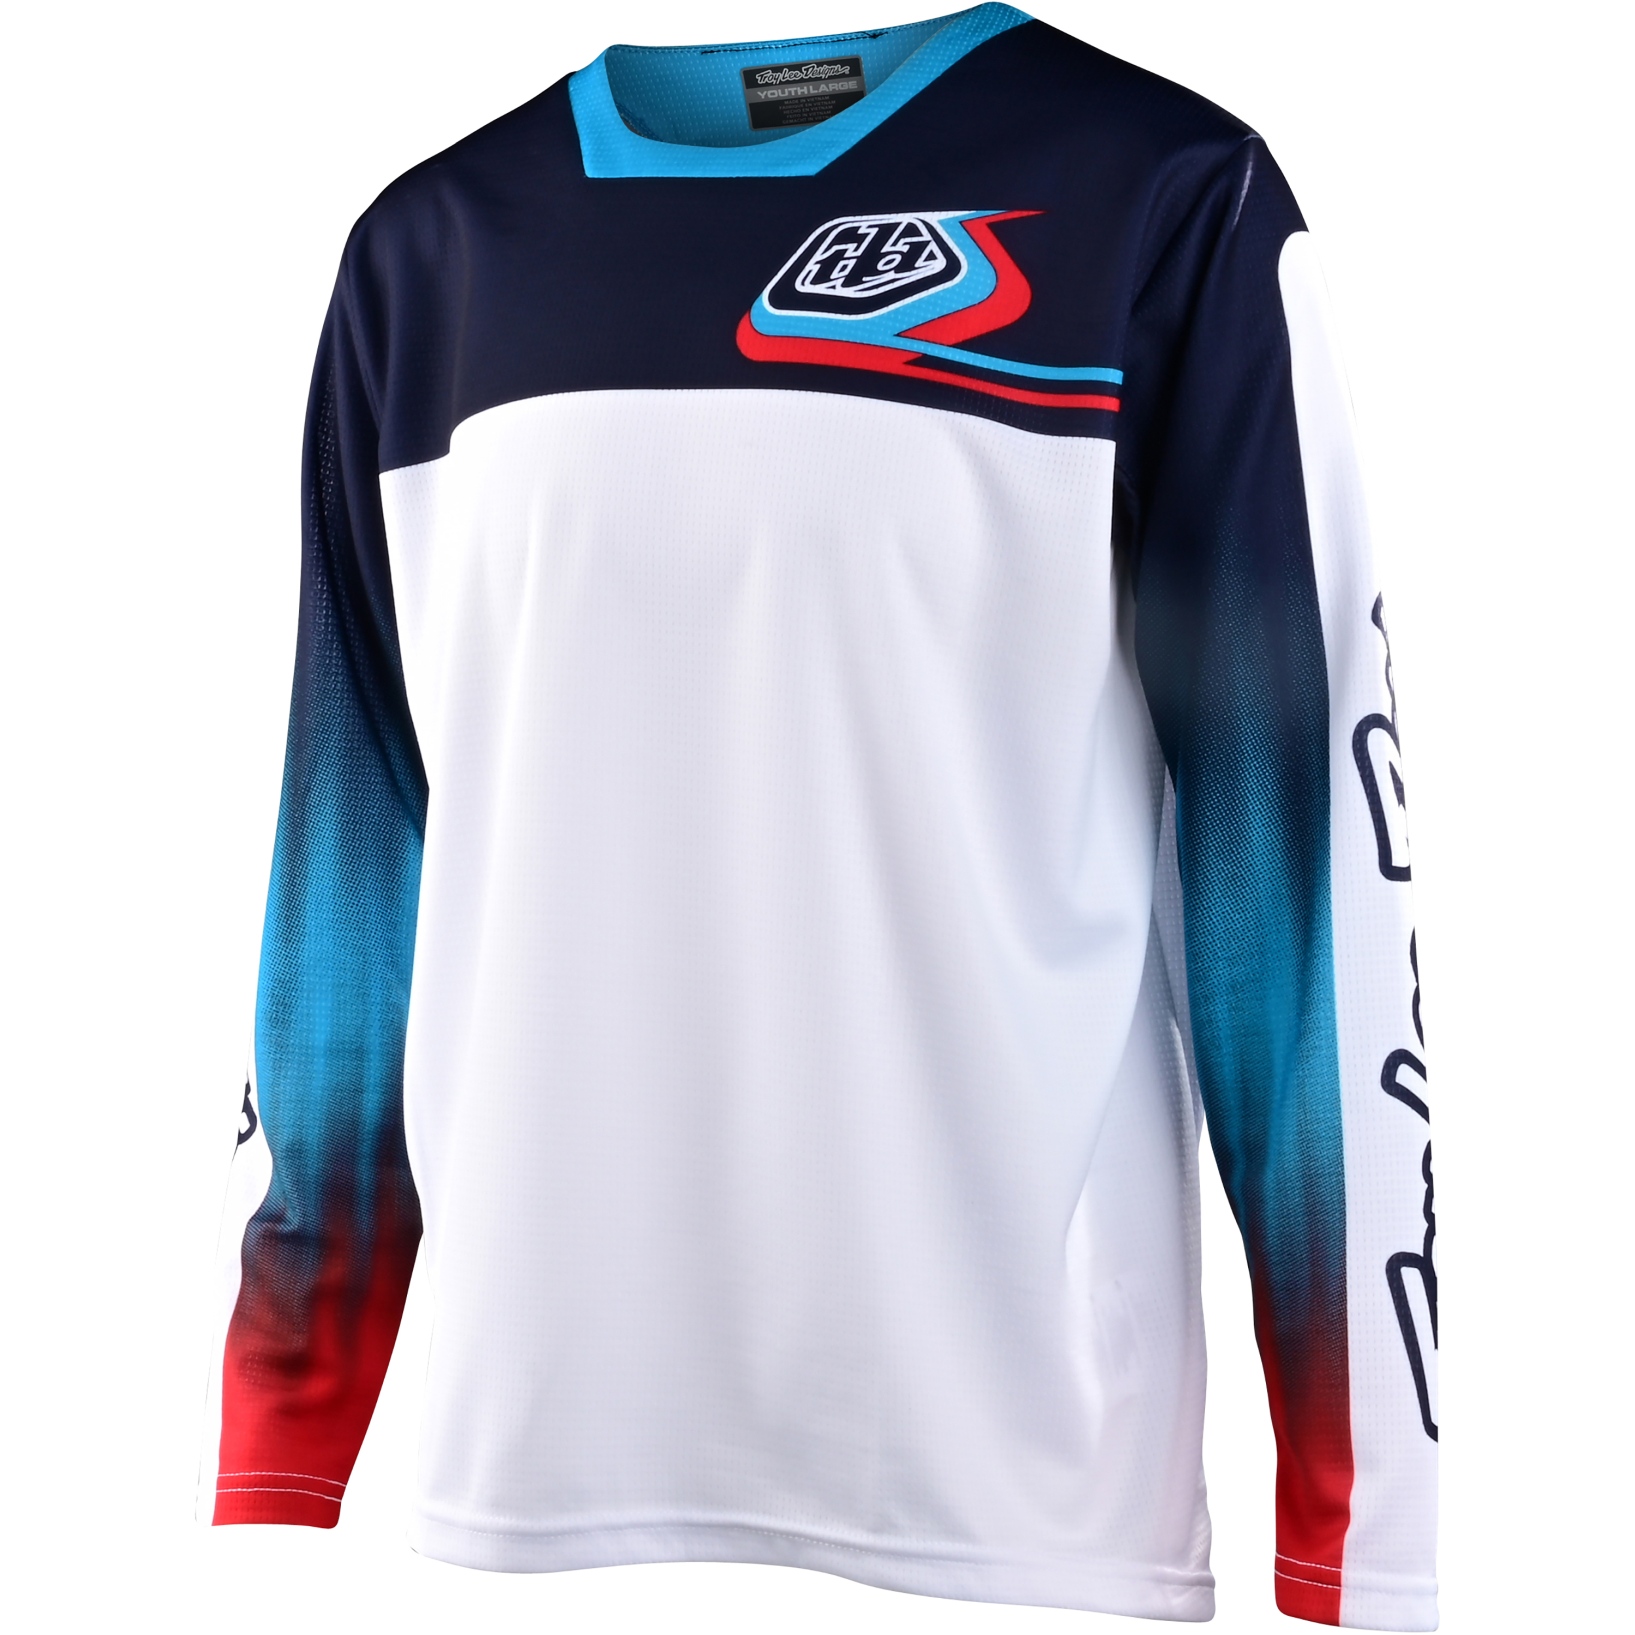 Productfoto van Troy Lee Designs Sprint Jersey Youth - Jet Fuel White